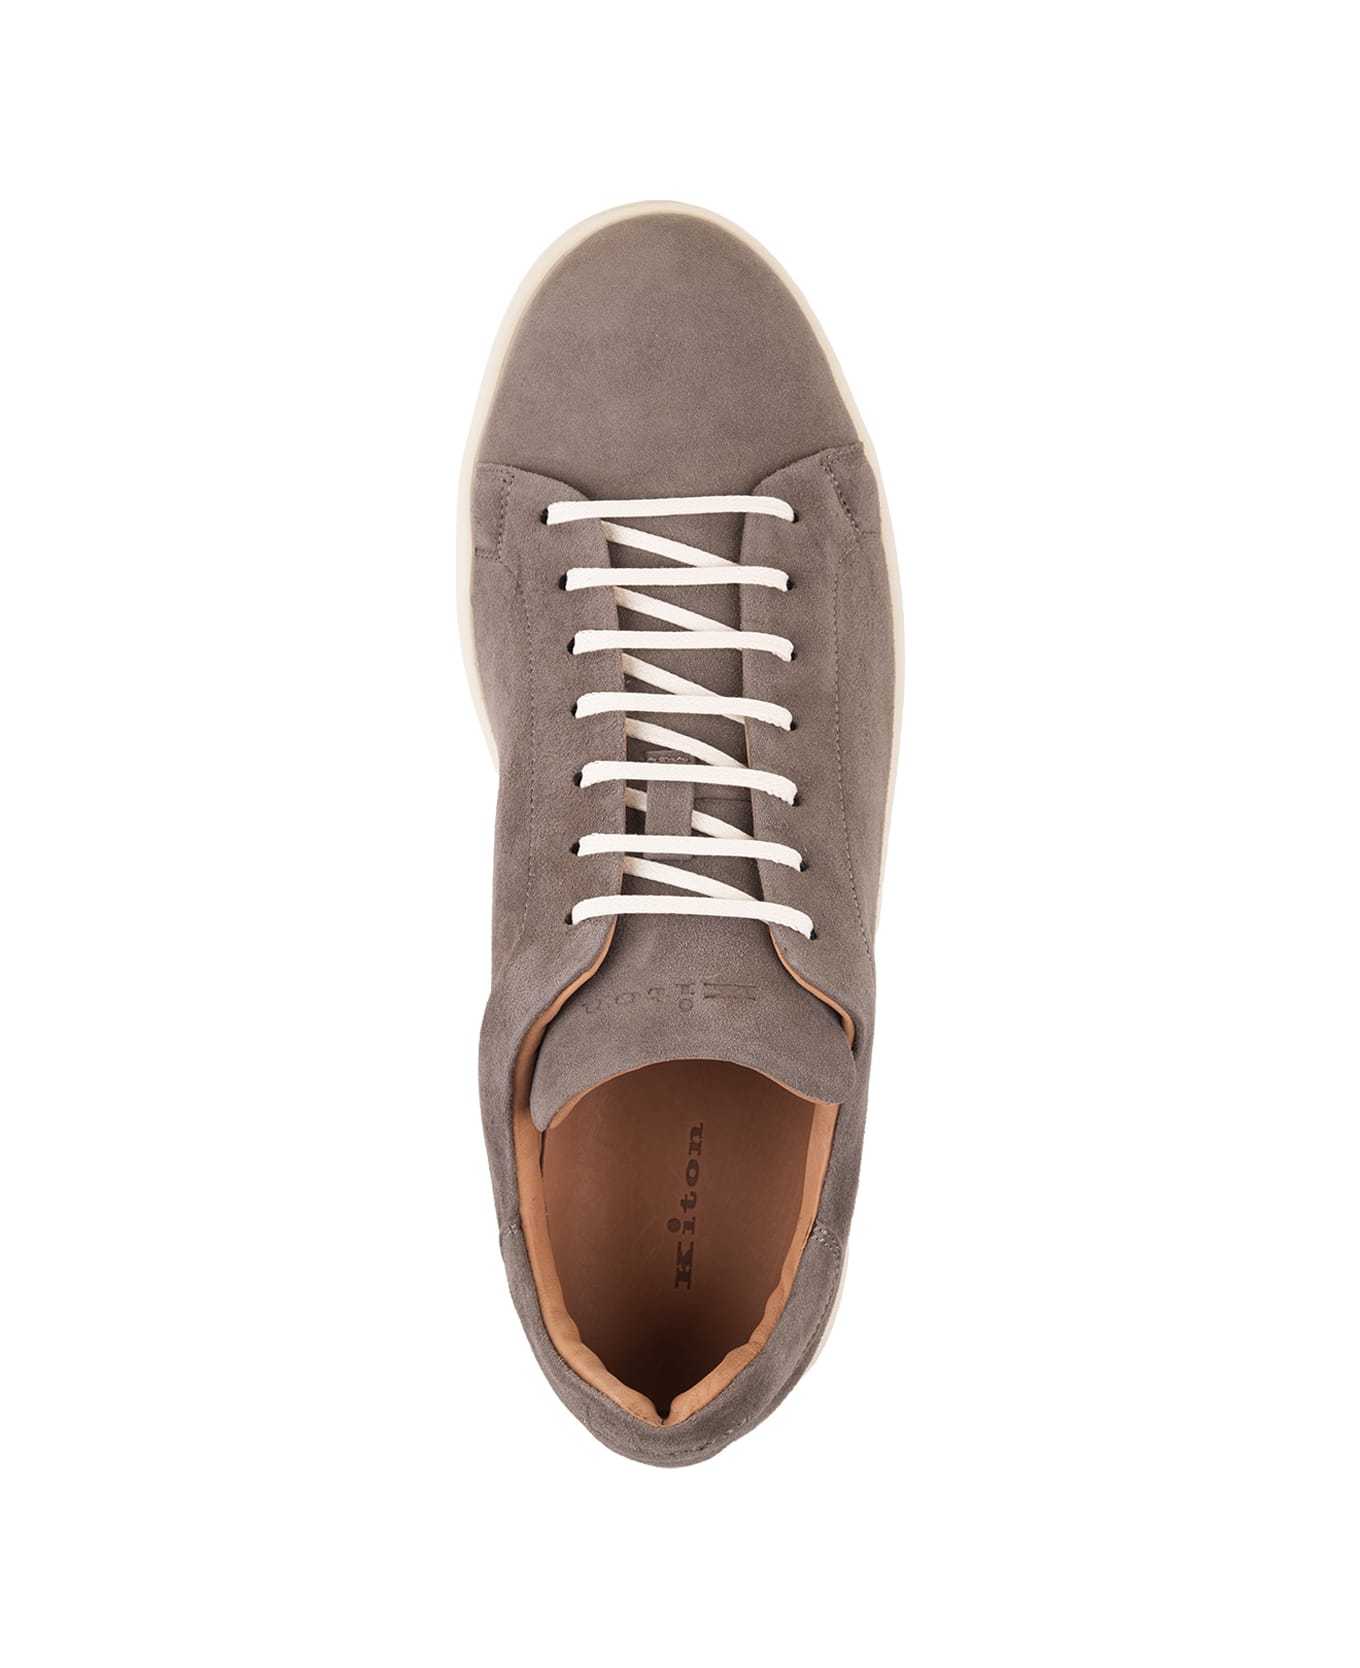 Kiton Taupe Suede Low Sneakers - Grey スニーカー